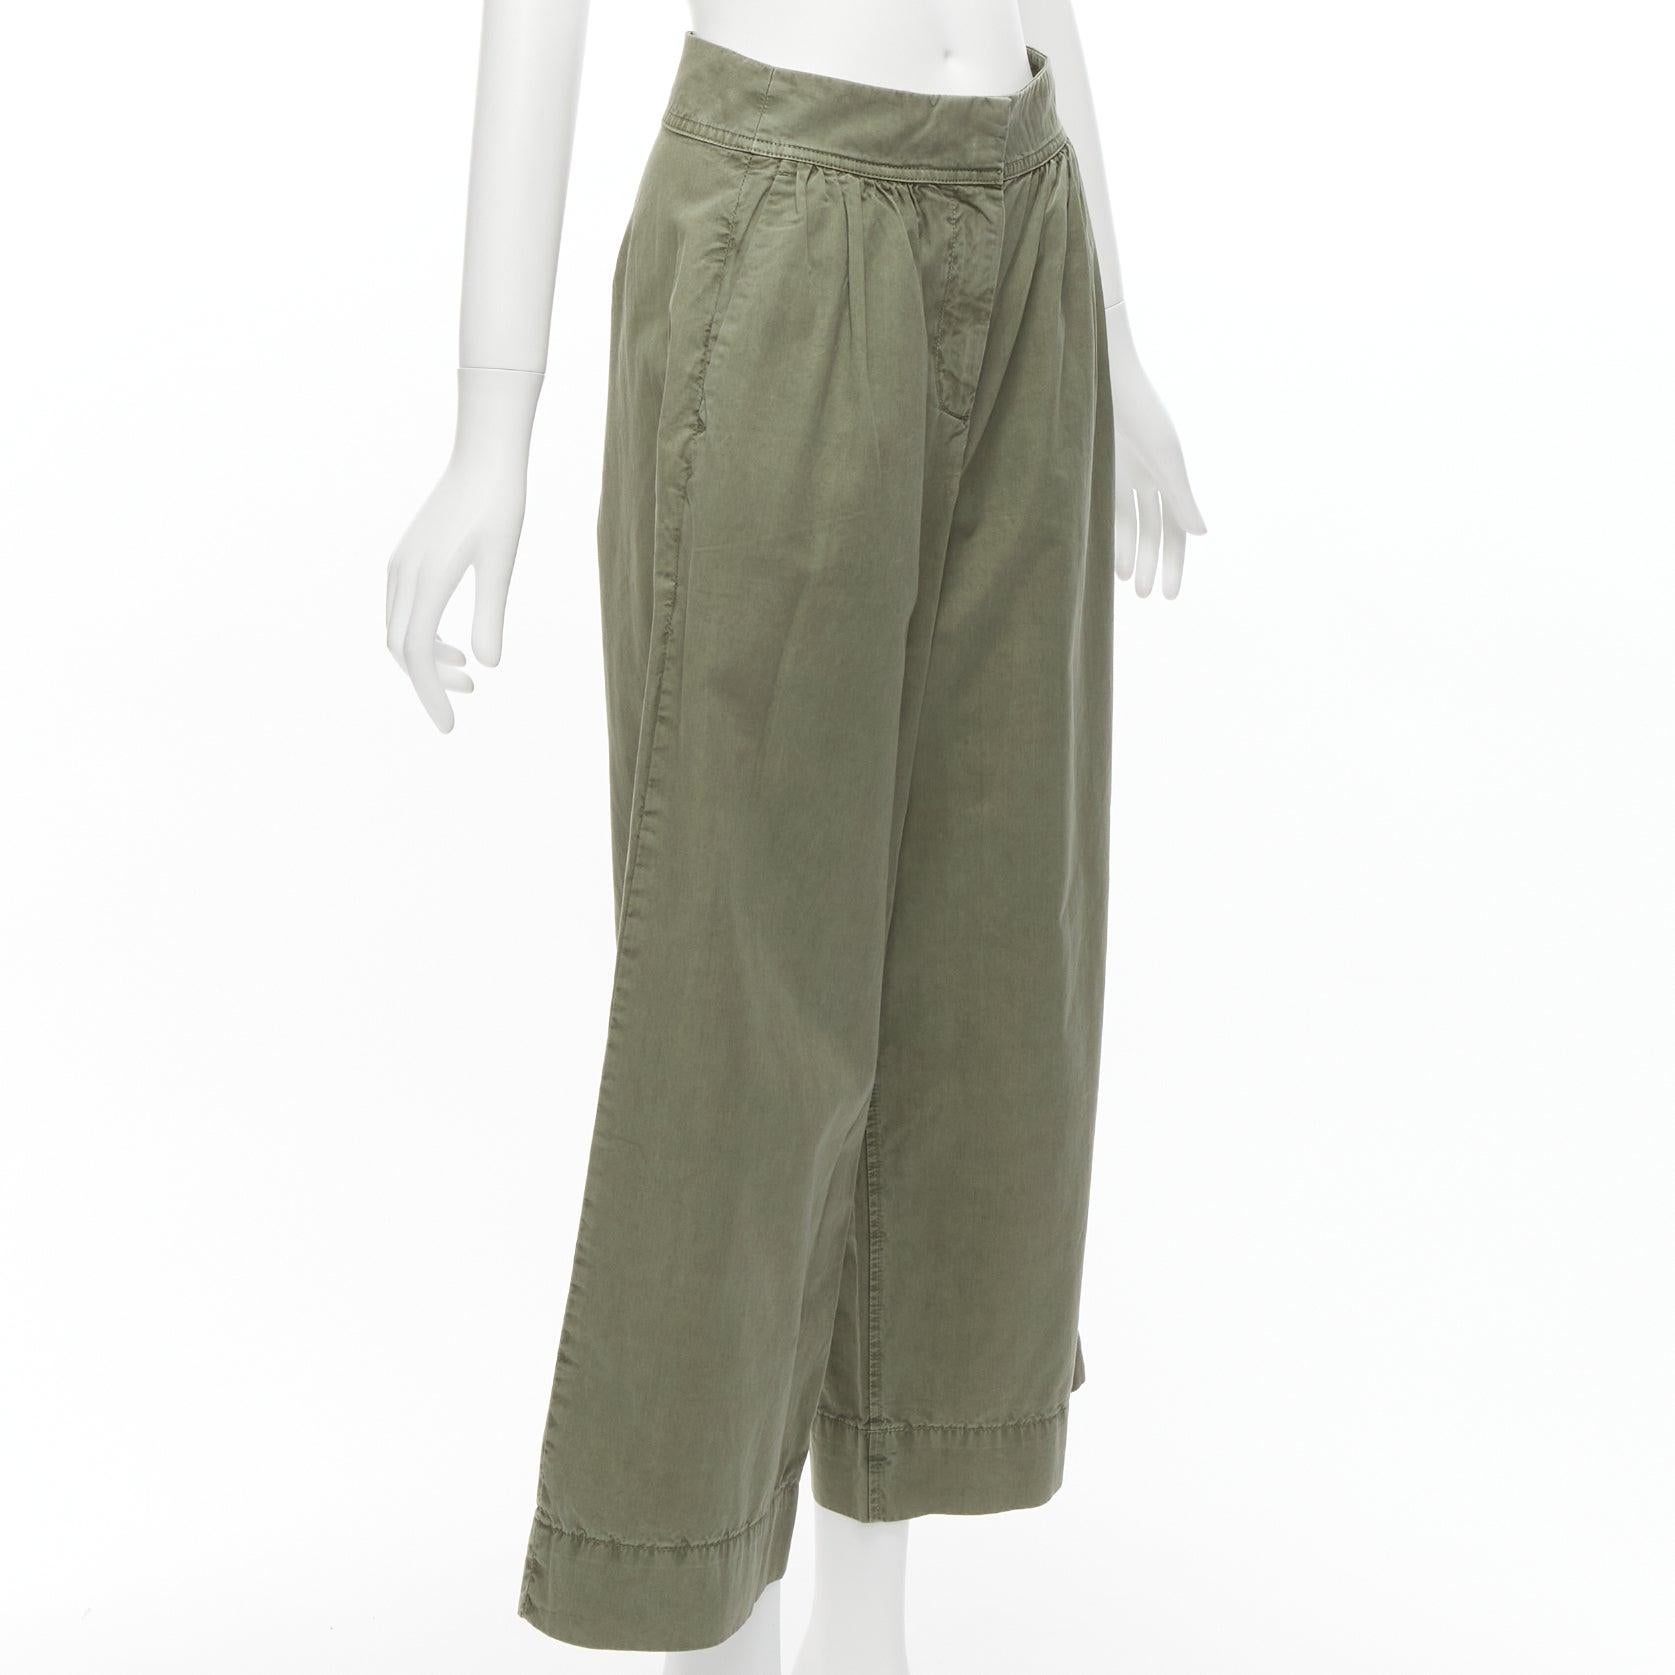 J.CREW COLLECTION 100% washed green cotton pleat front wide safari pants US0 XS
Reference: SNKO/A00411
Brand: J.Crew
Material: Cotton
Color: Green
Pattern: Solid
Closure: Zip Fly
Extra Details: Back darts.
Made in: China

CONDITION:
Condition: